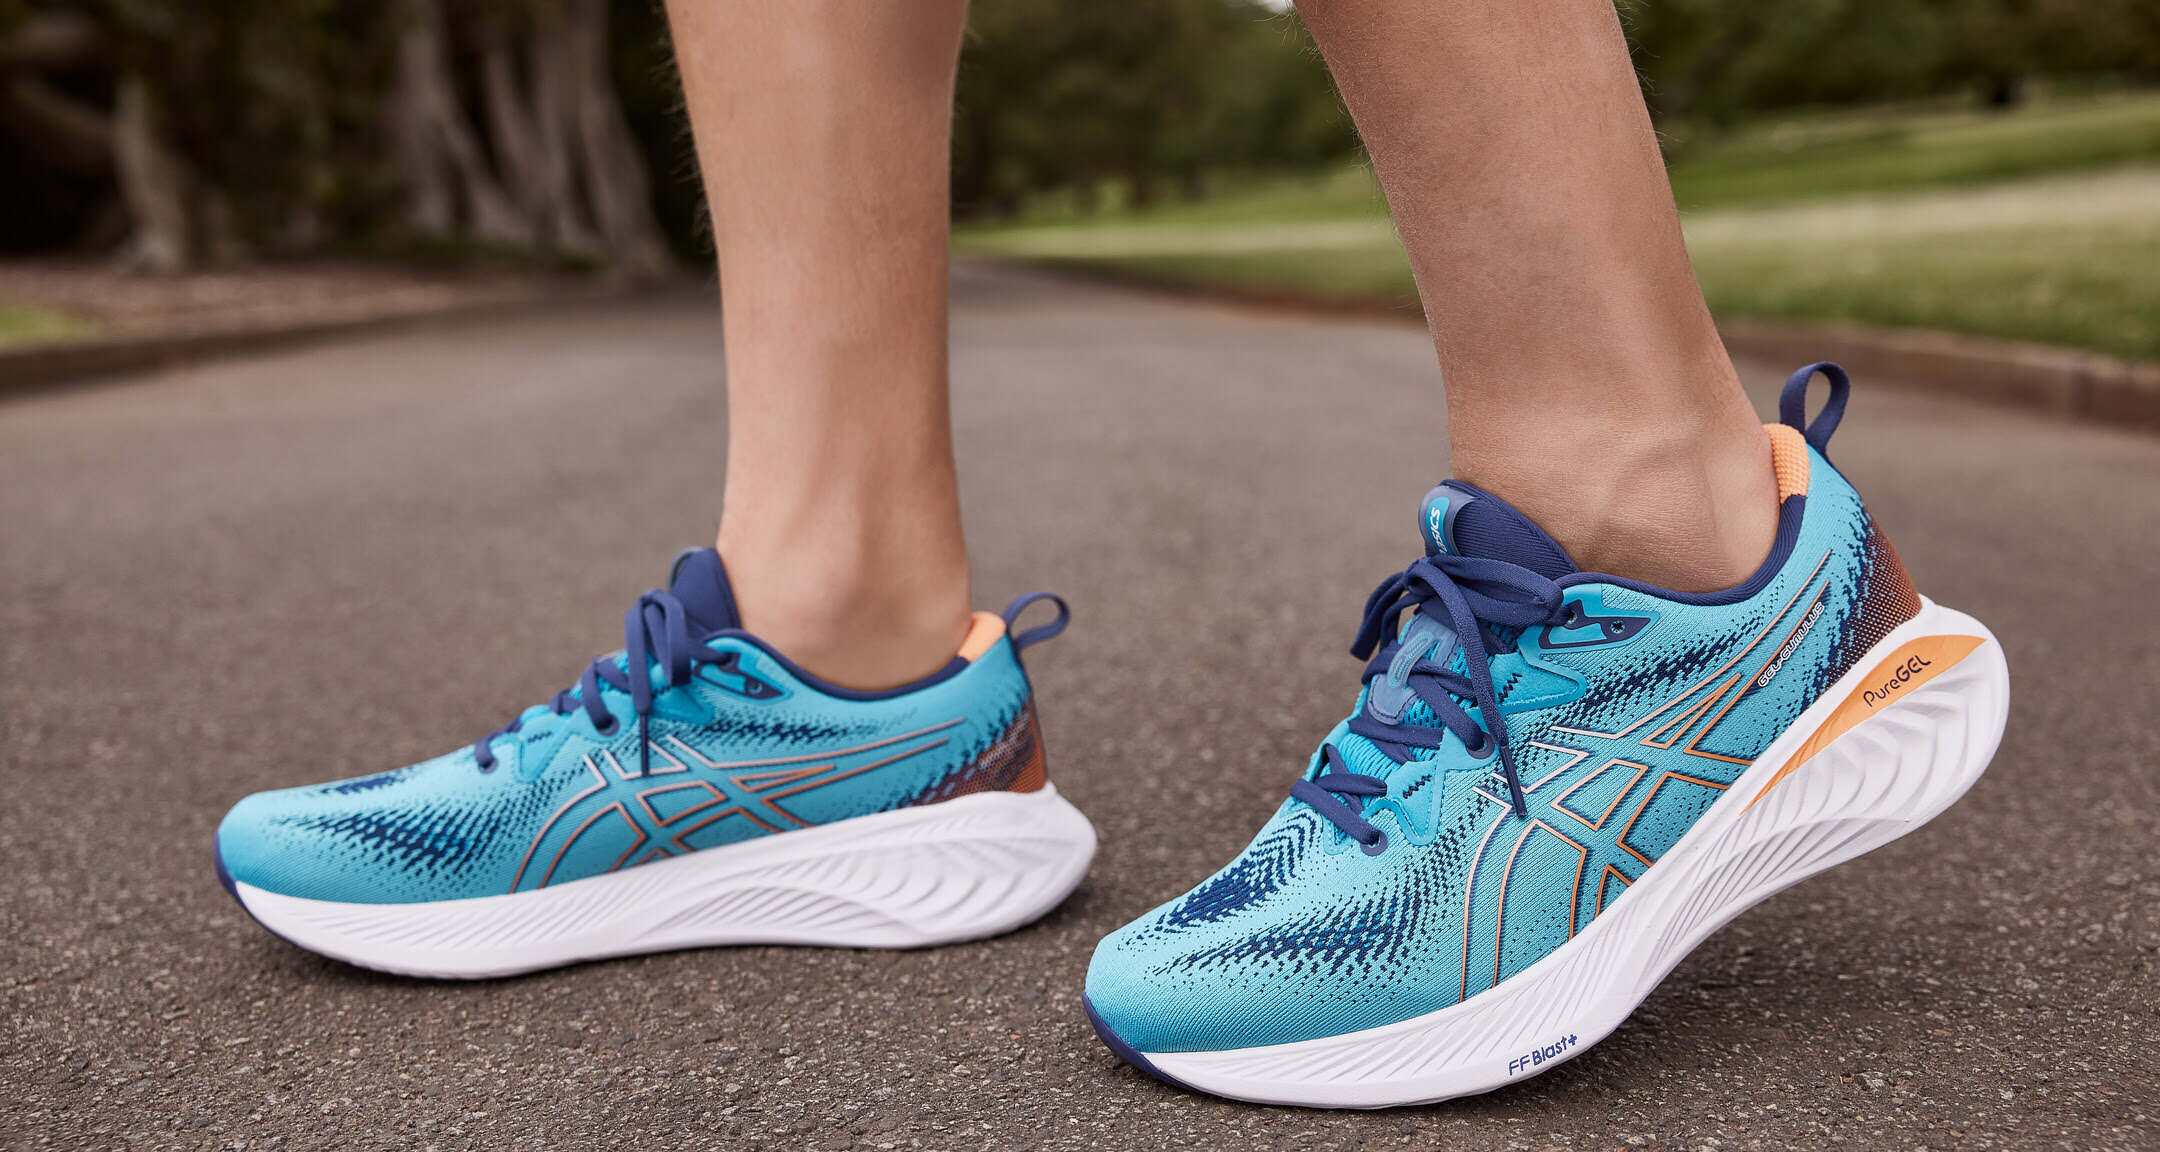 best running shoes after knee replacement